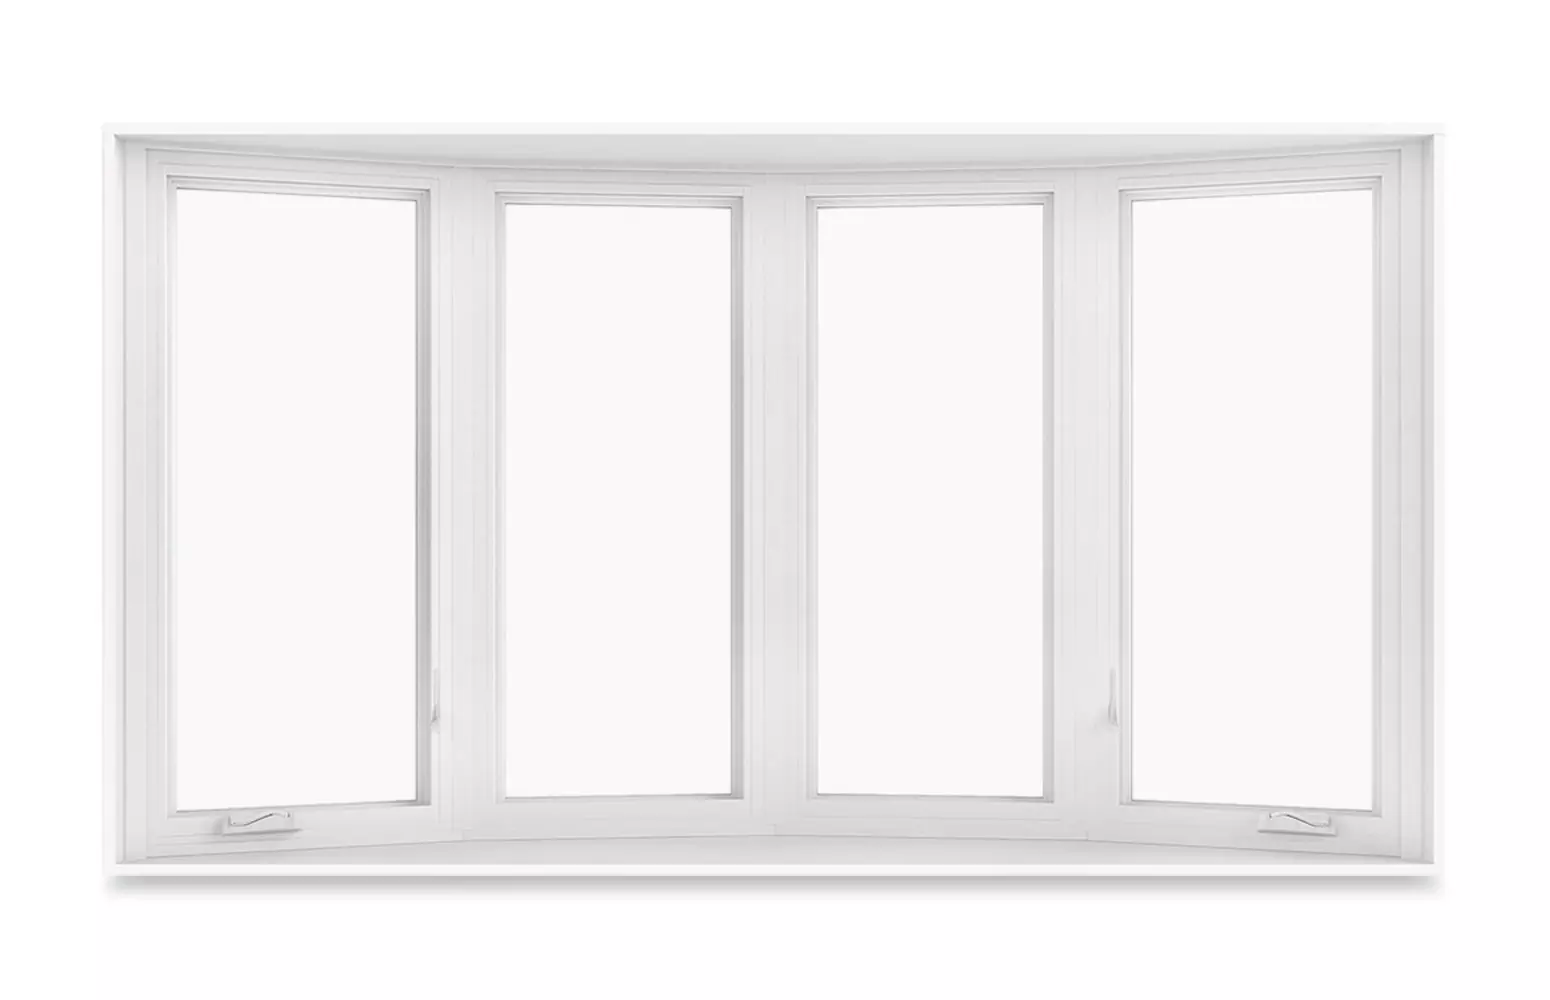 Bow window with 4-wide casements